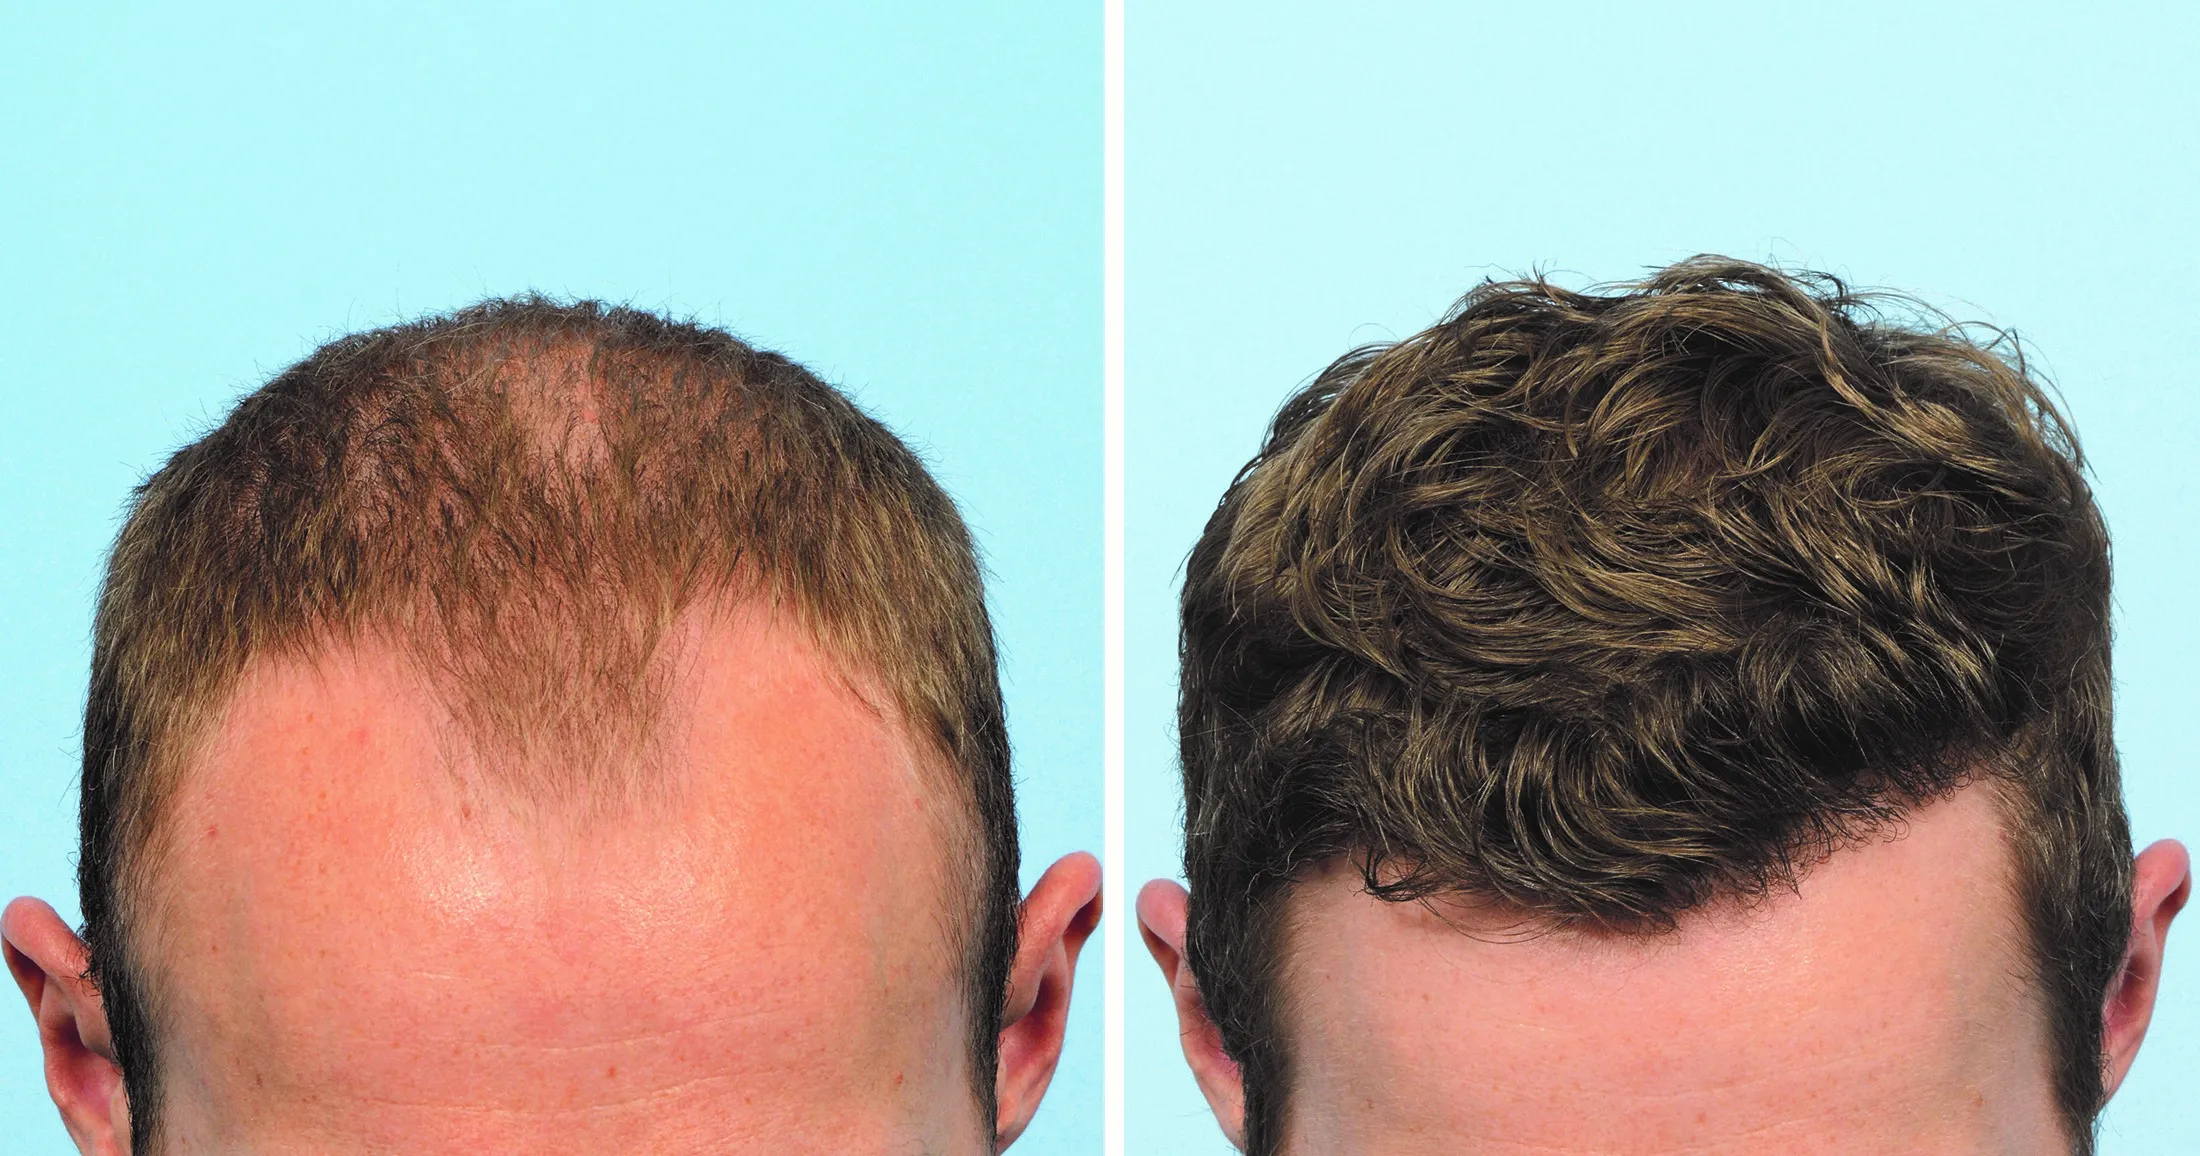 How do surgeons determine the appropriate hairline design for a patient?